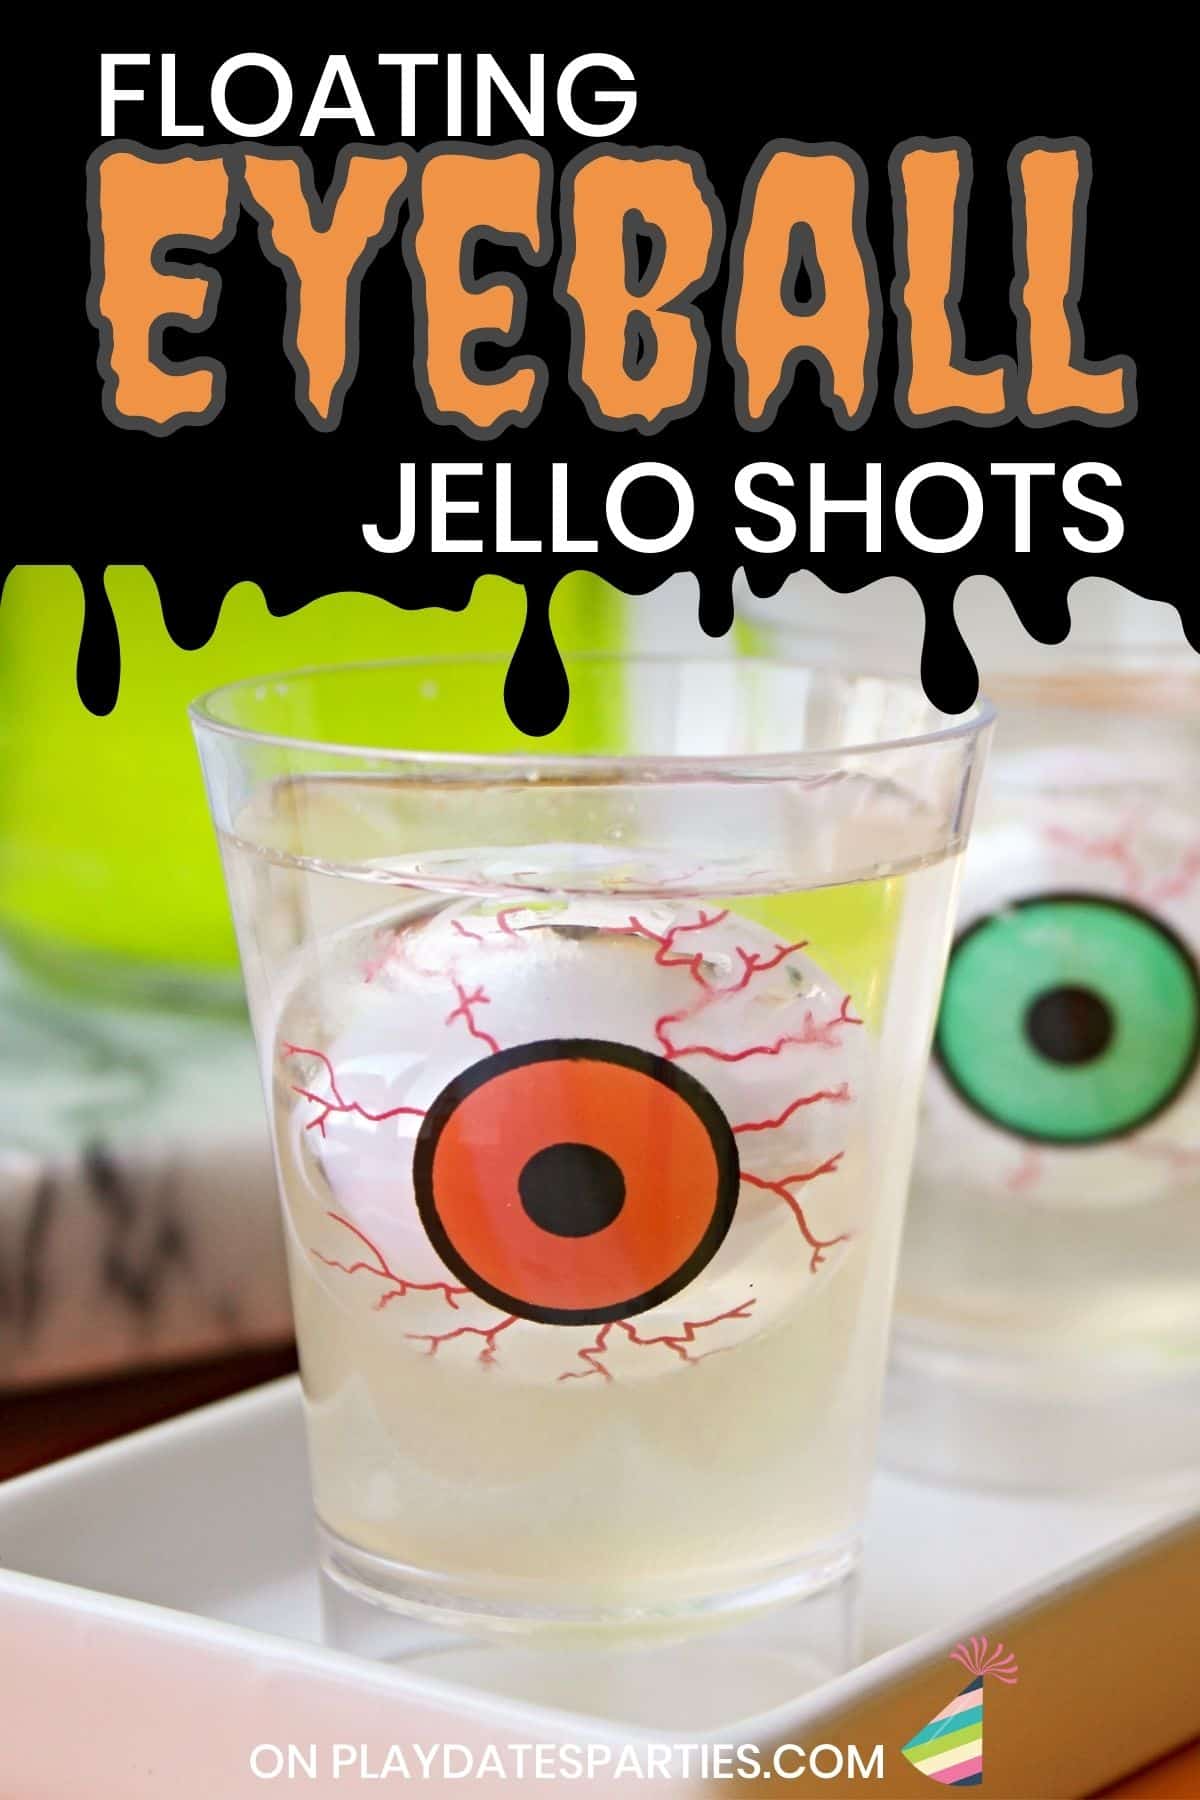 A floating eyeball jello shot for Halloween on a white tray.